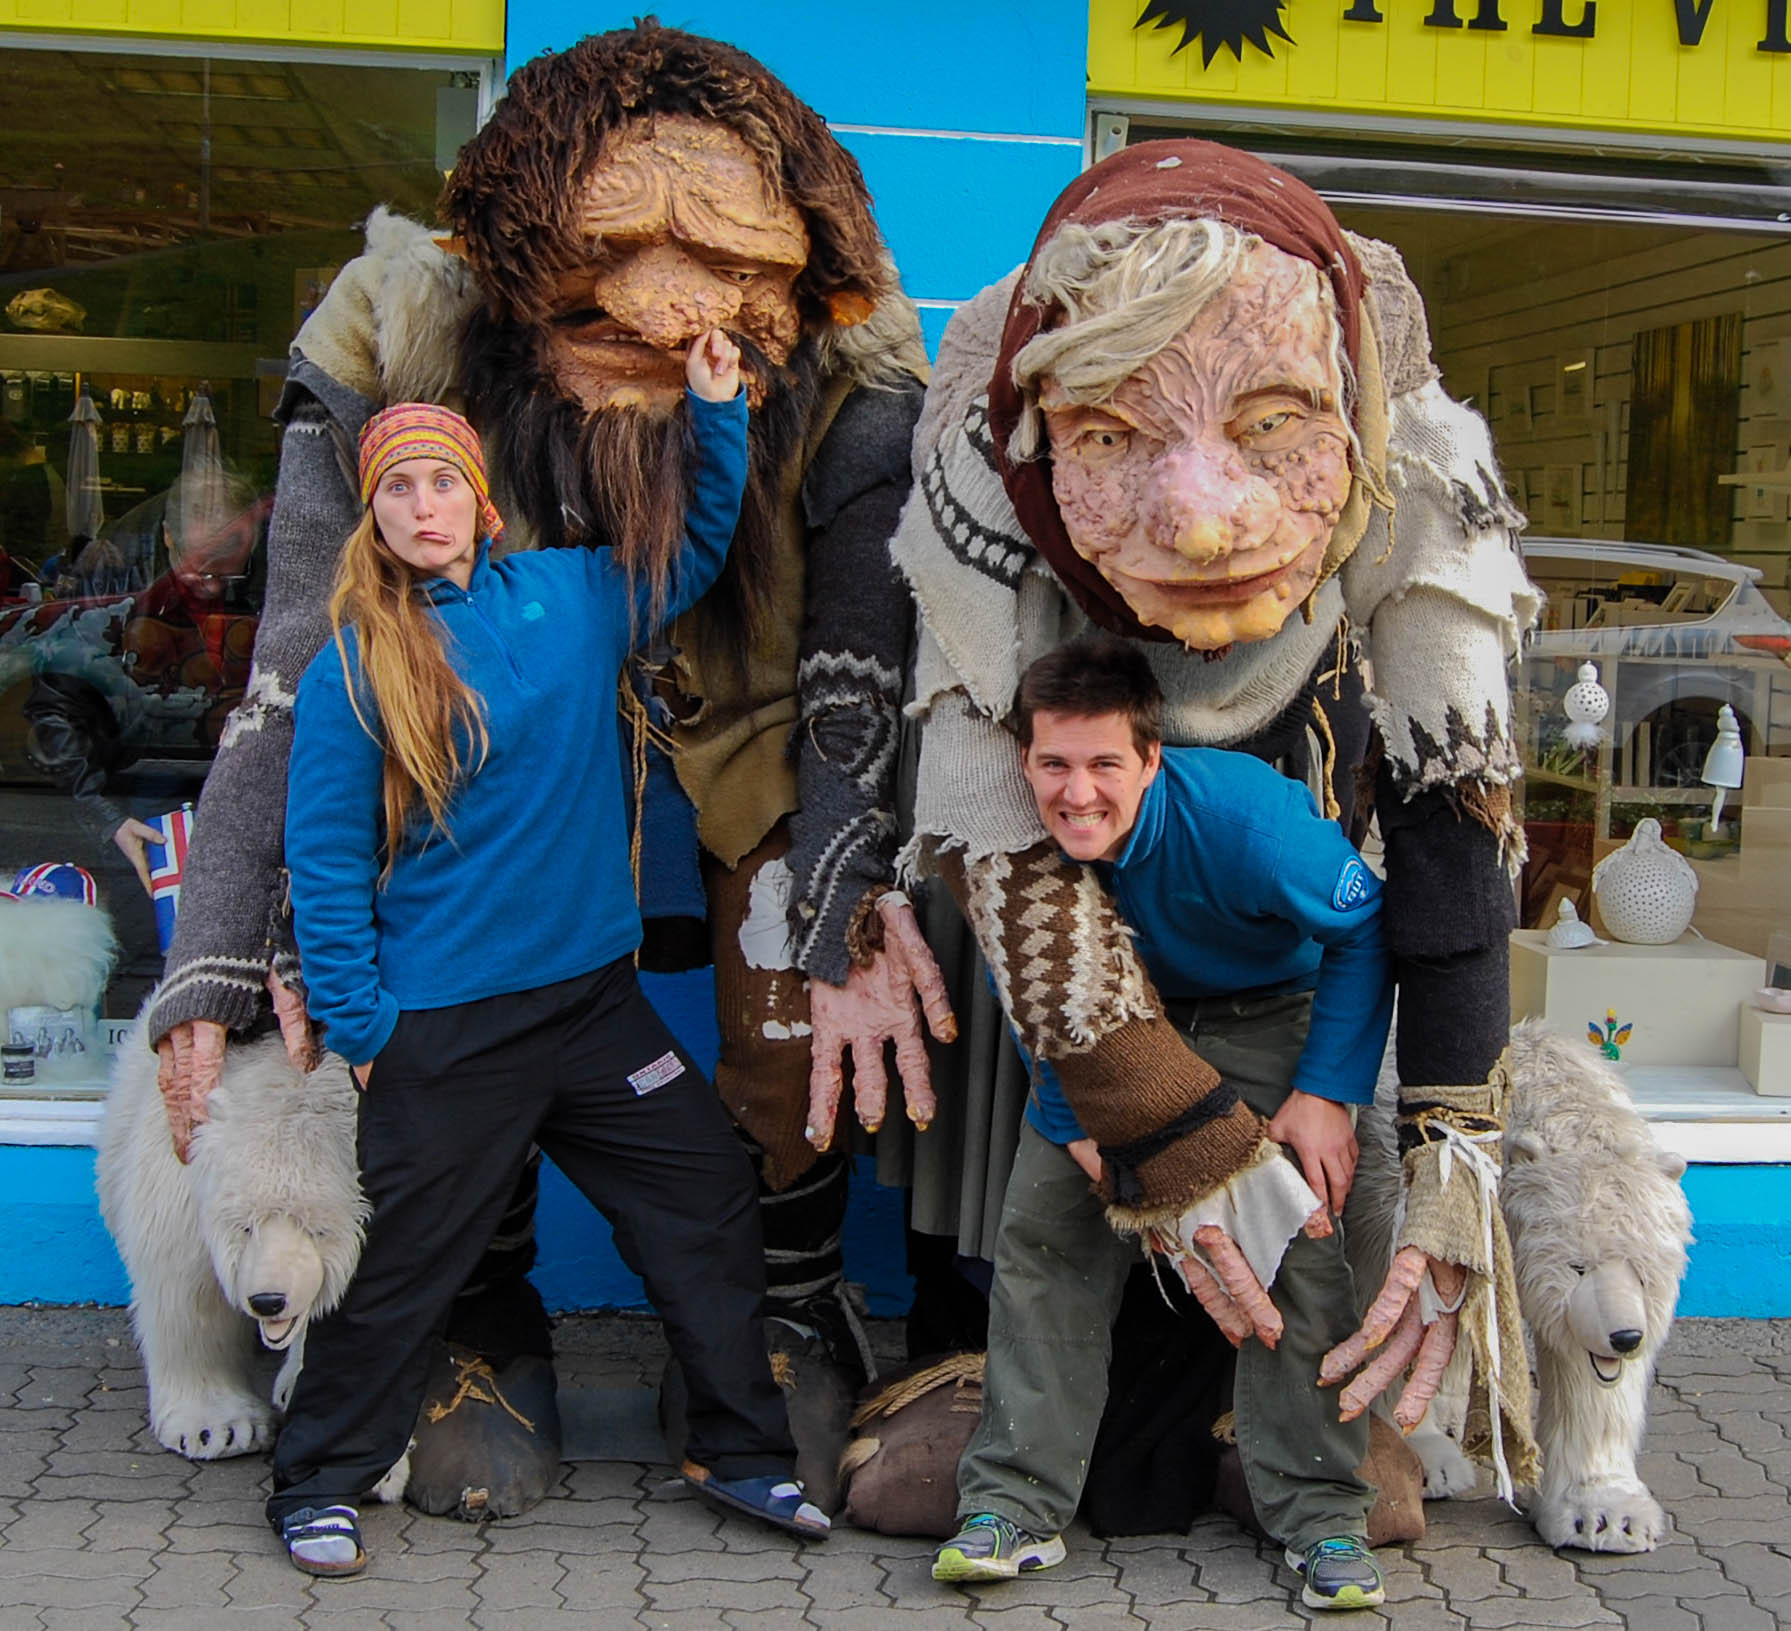 Ali and Joey with Trolls in Reykjavik